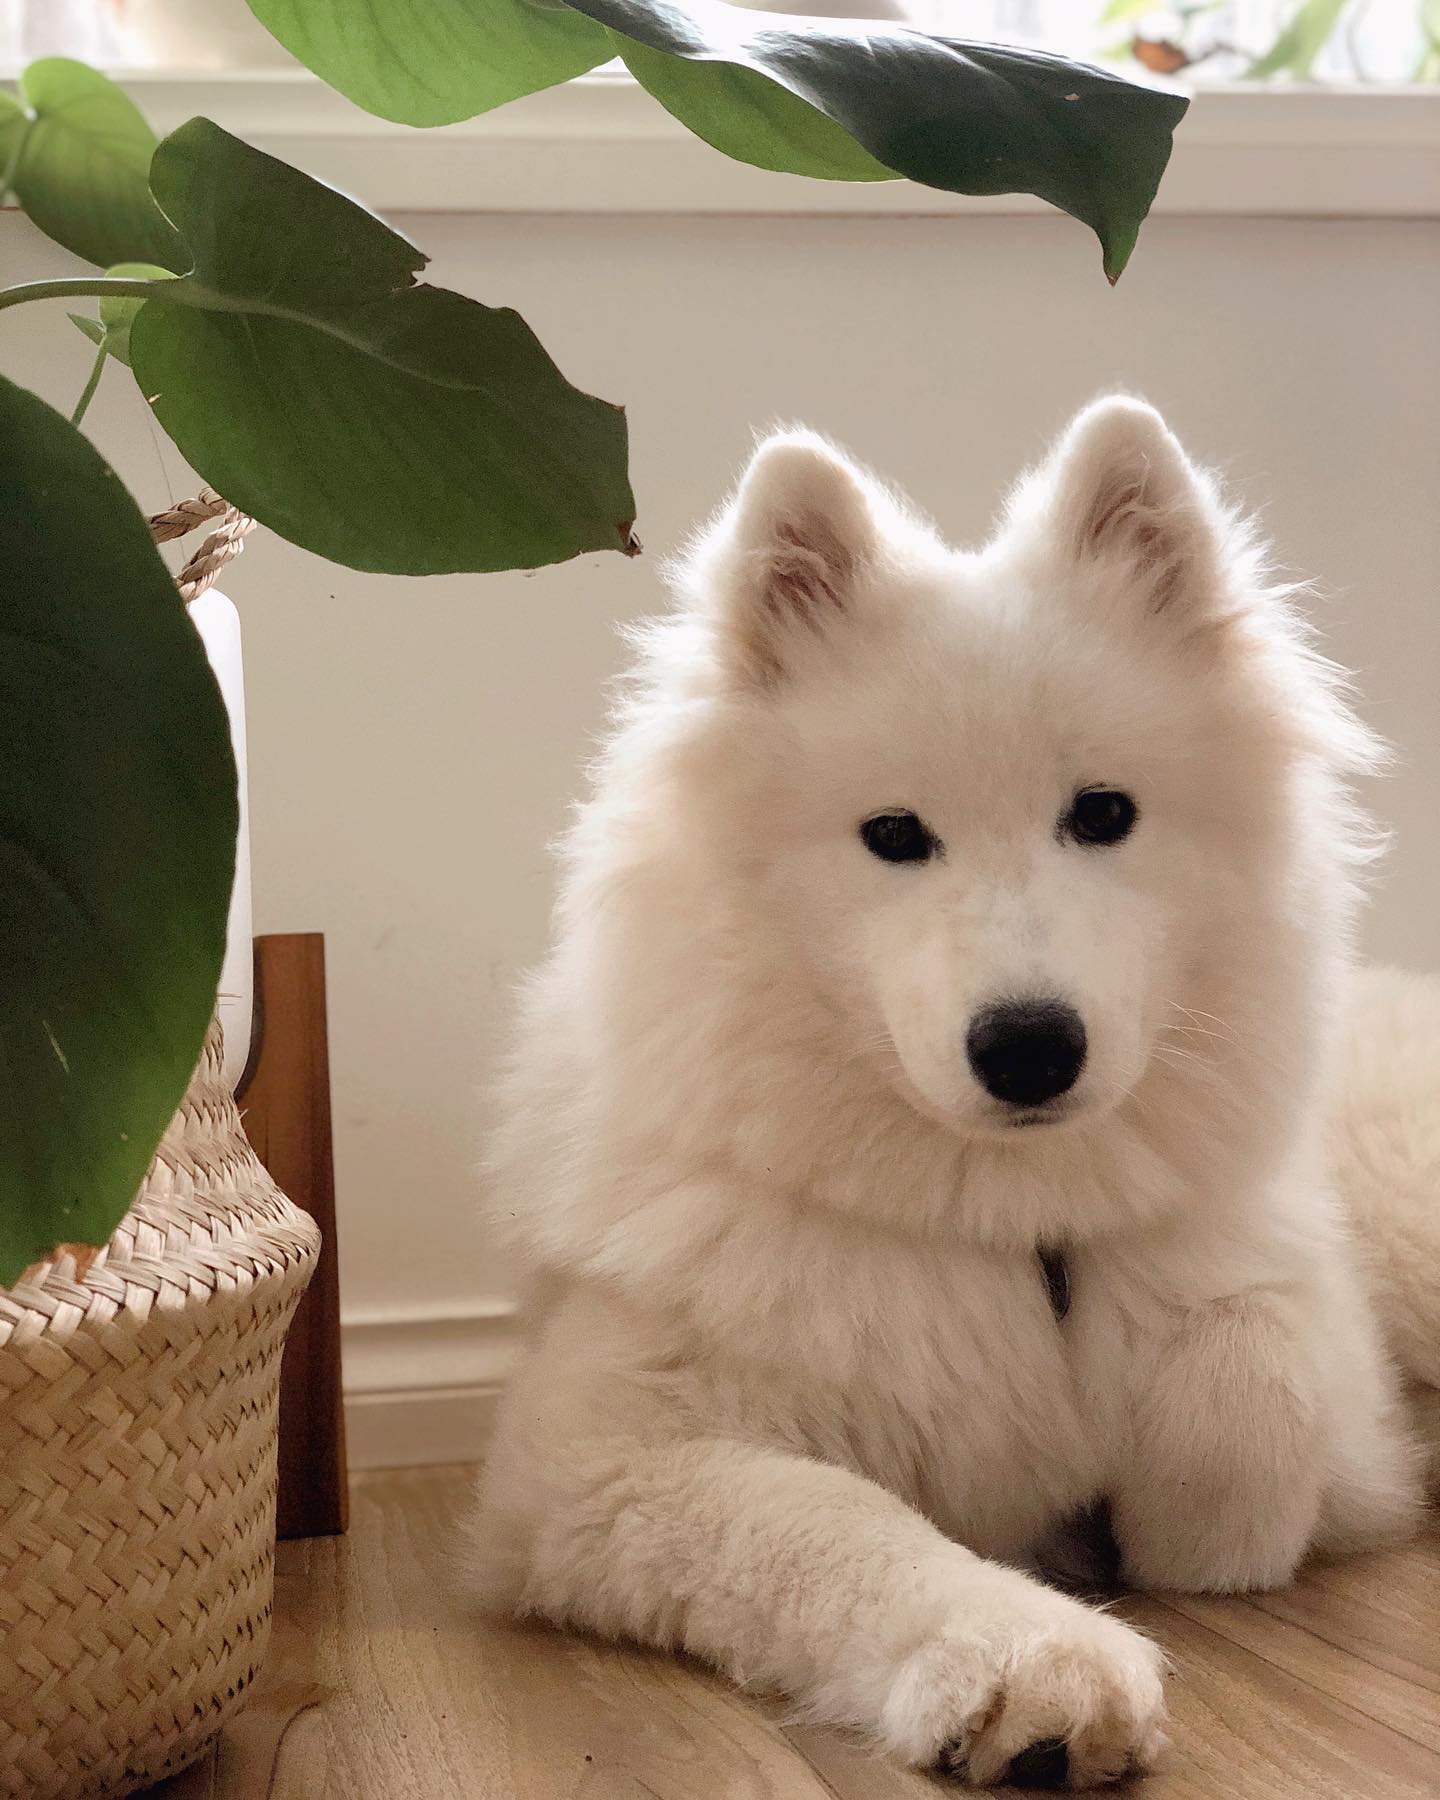 Sprite the Samoyed puppy looking directly at the camera